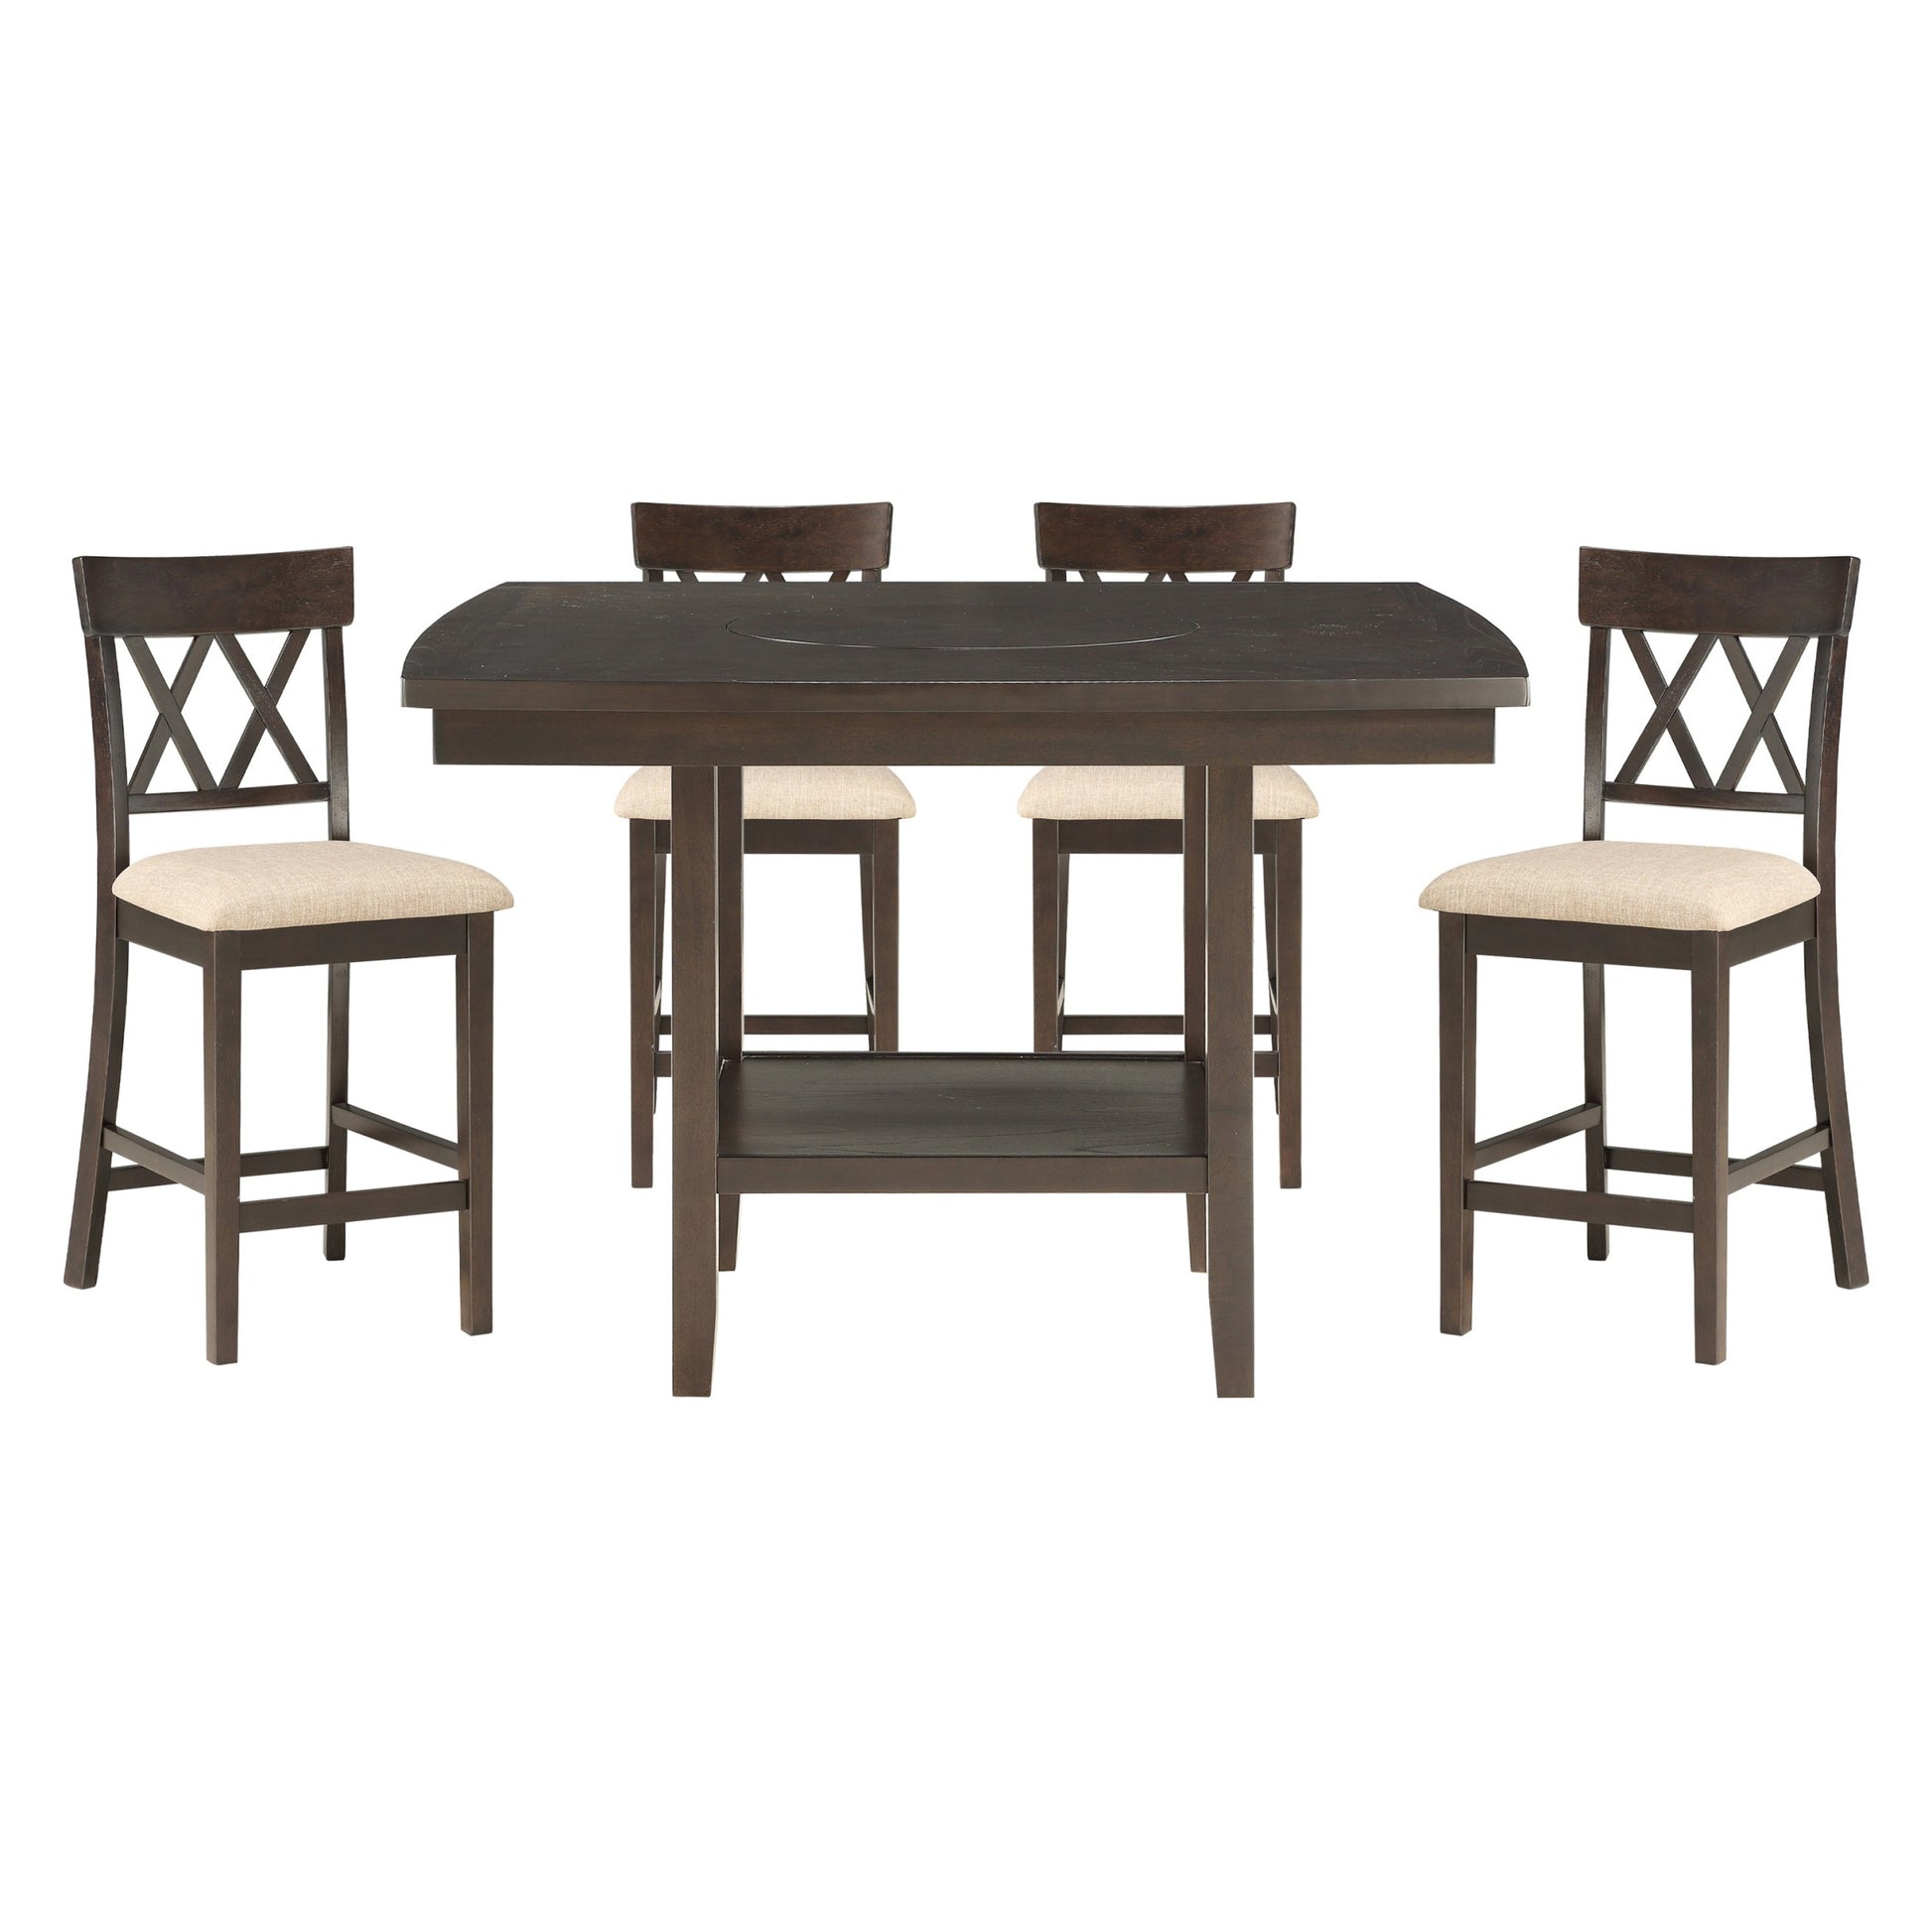 Dark Brown Finish Counter Height Table with Lazy Susan wood-wood-brown mix-wood-dining room-dining table